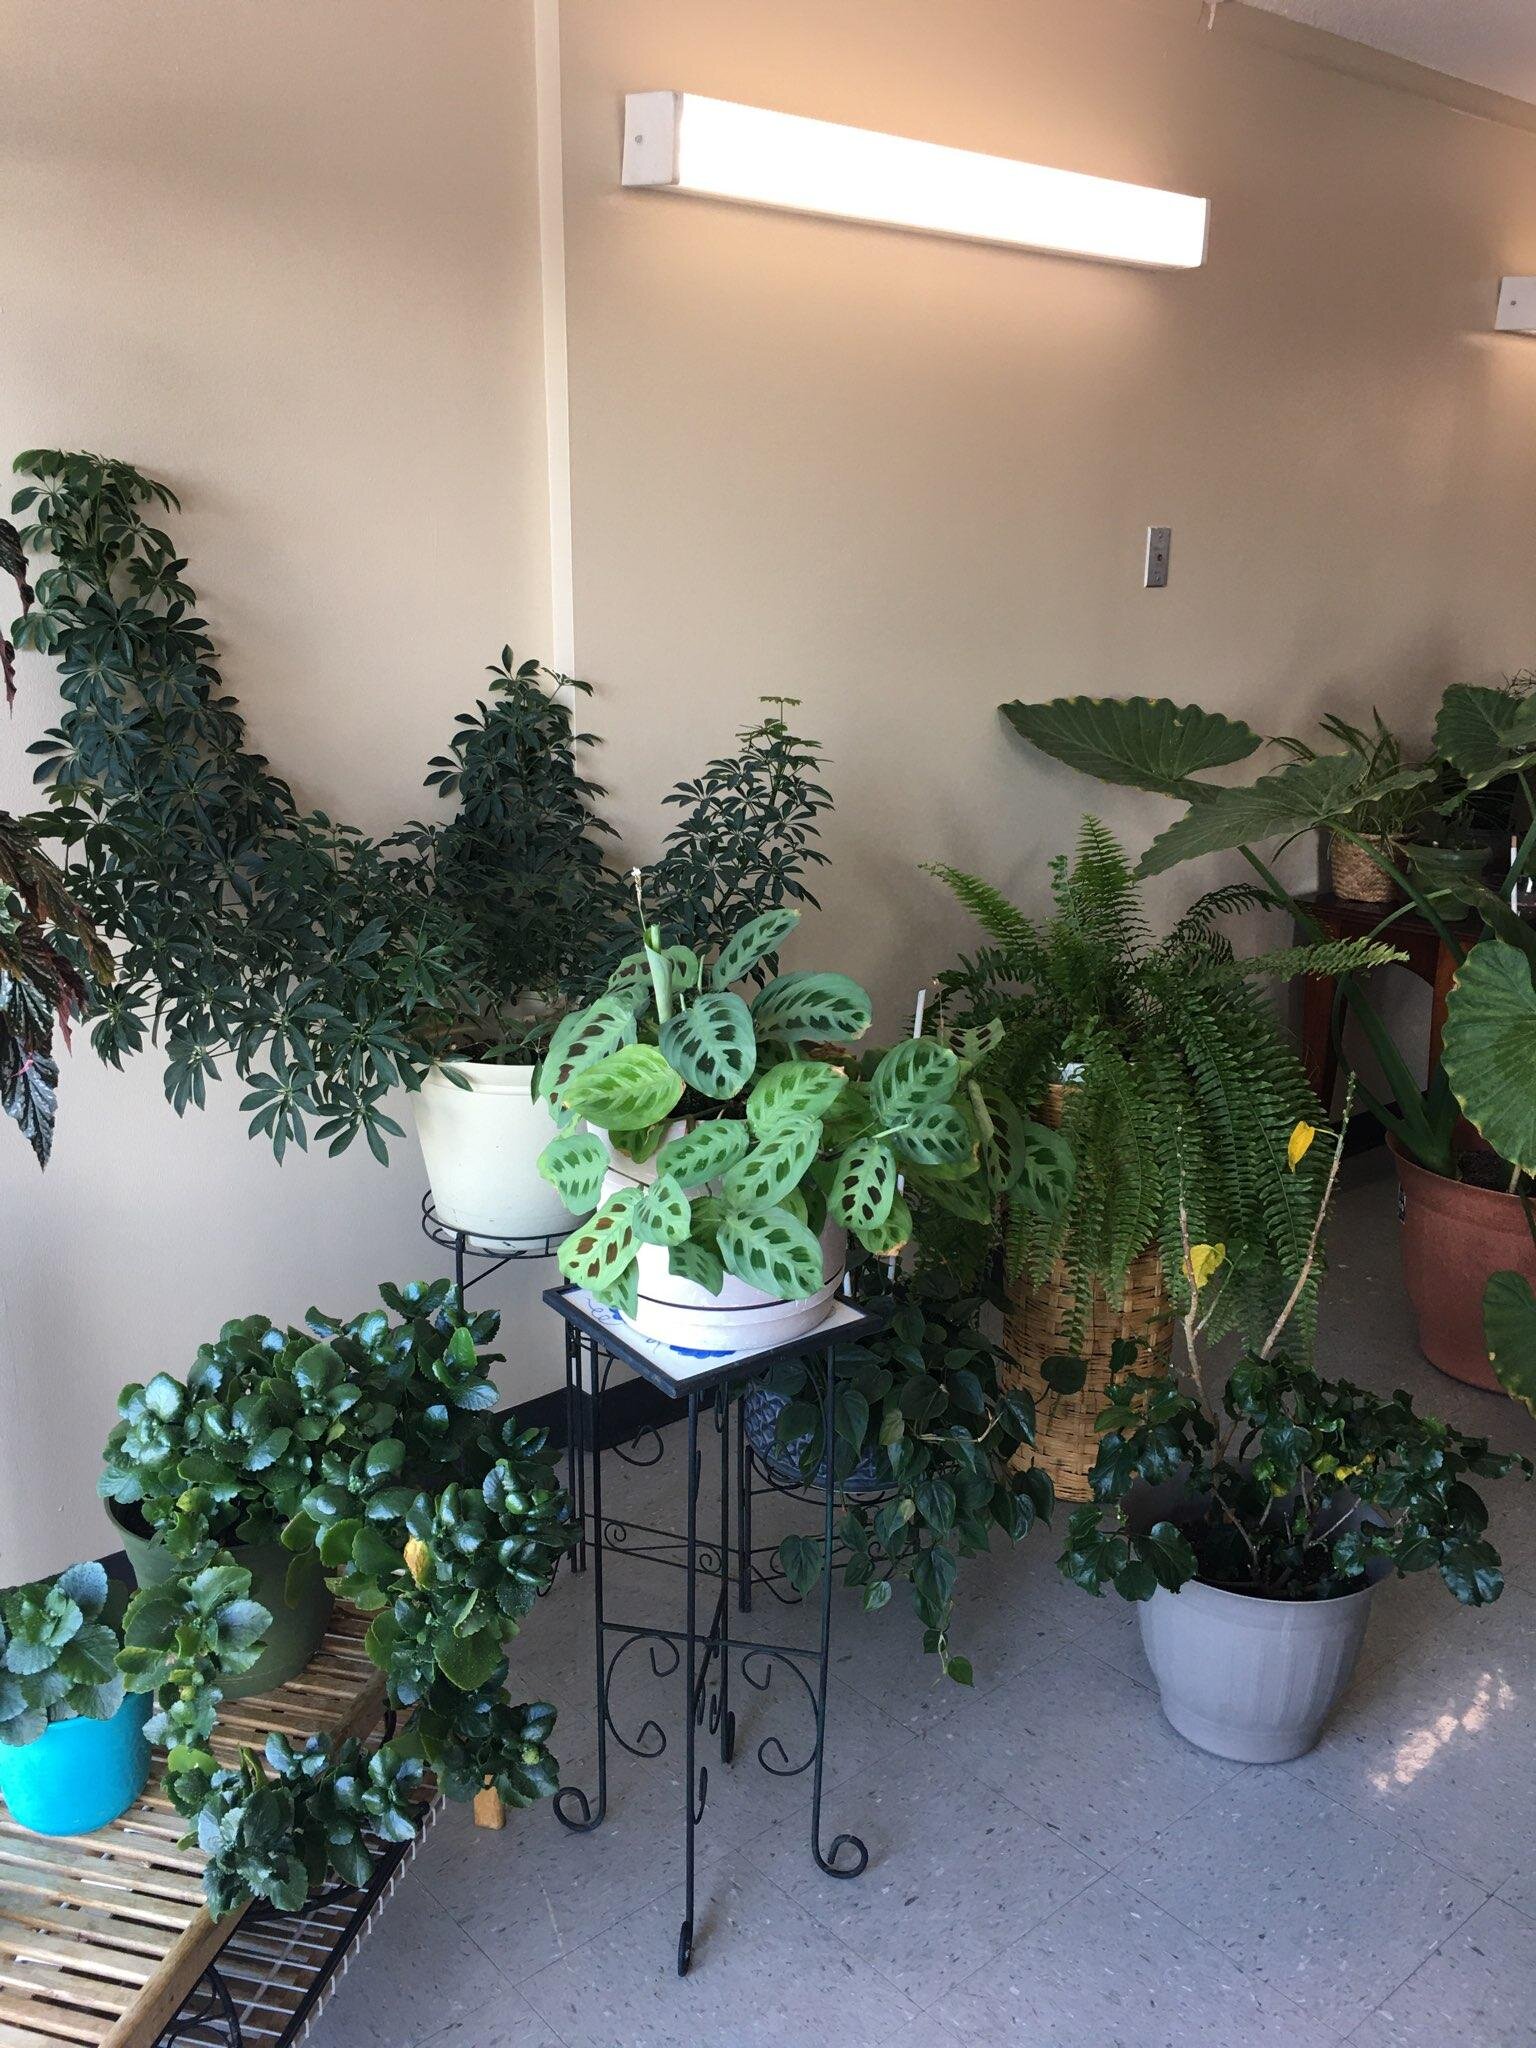 Cheryl takes care of the building's plants inside year-round, as well as its entryway planters in the warmer months.